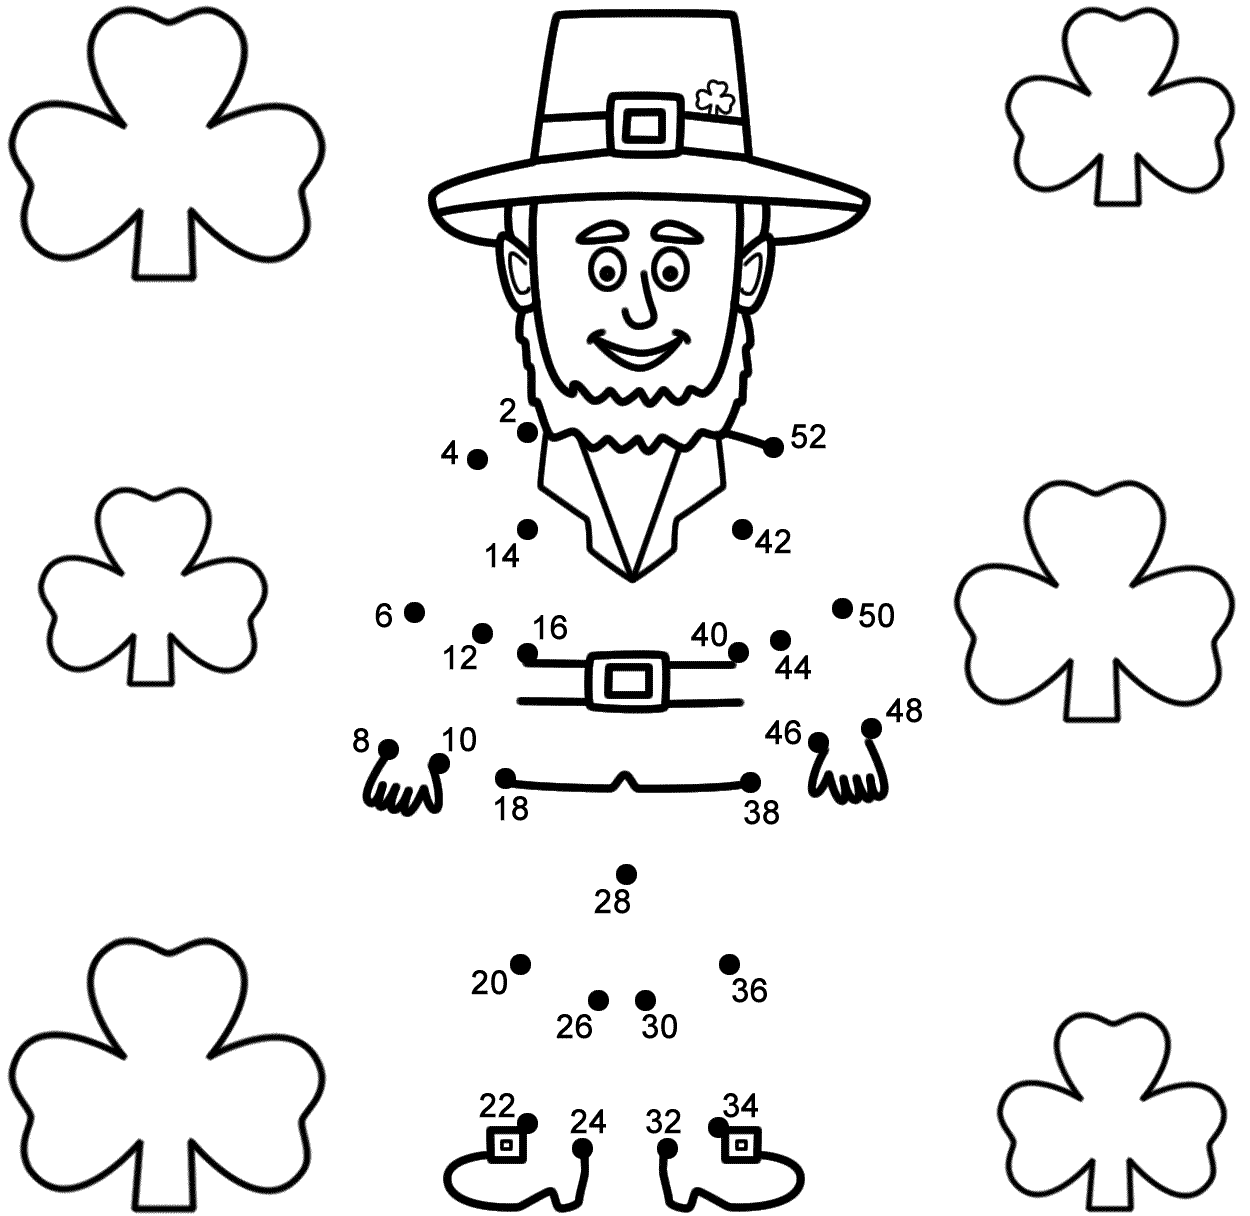 Leprechaun with Shamrocks - Connect the Dots, count by 2's (St. Patrick